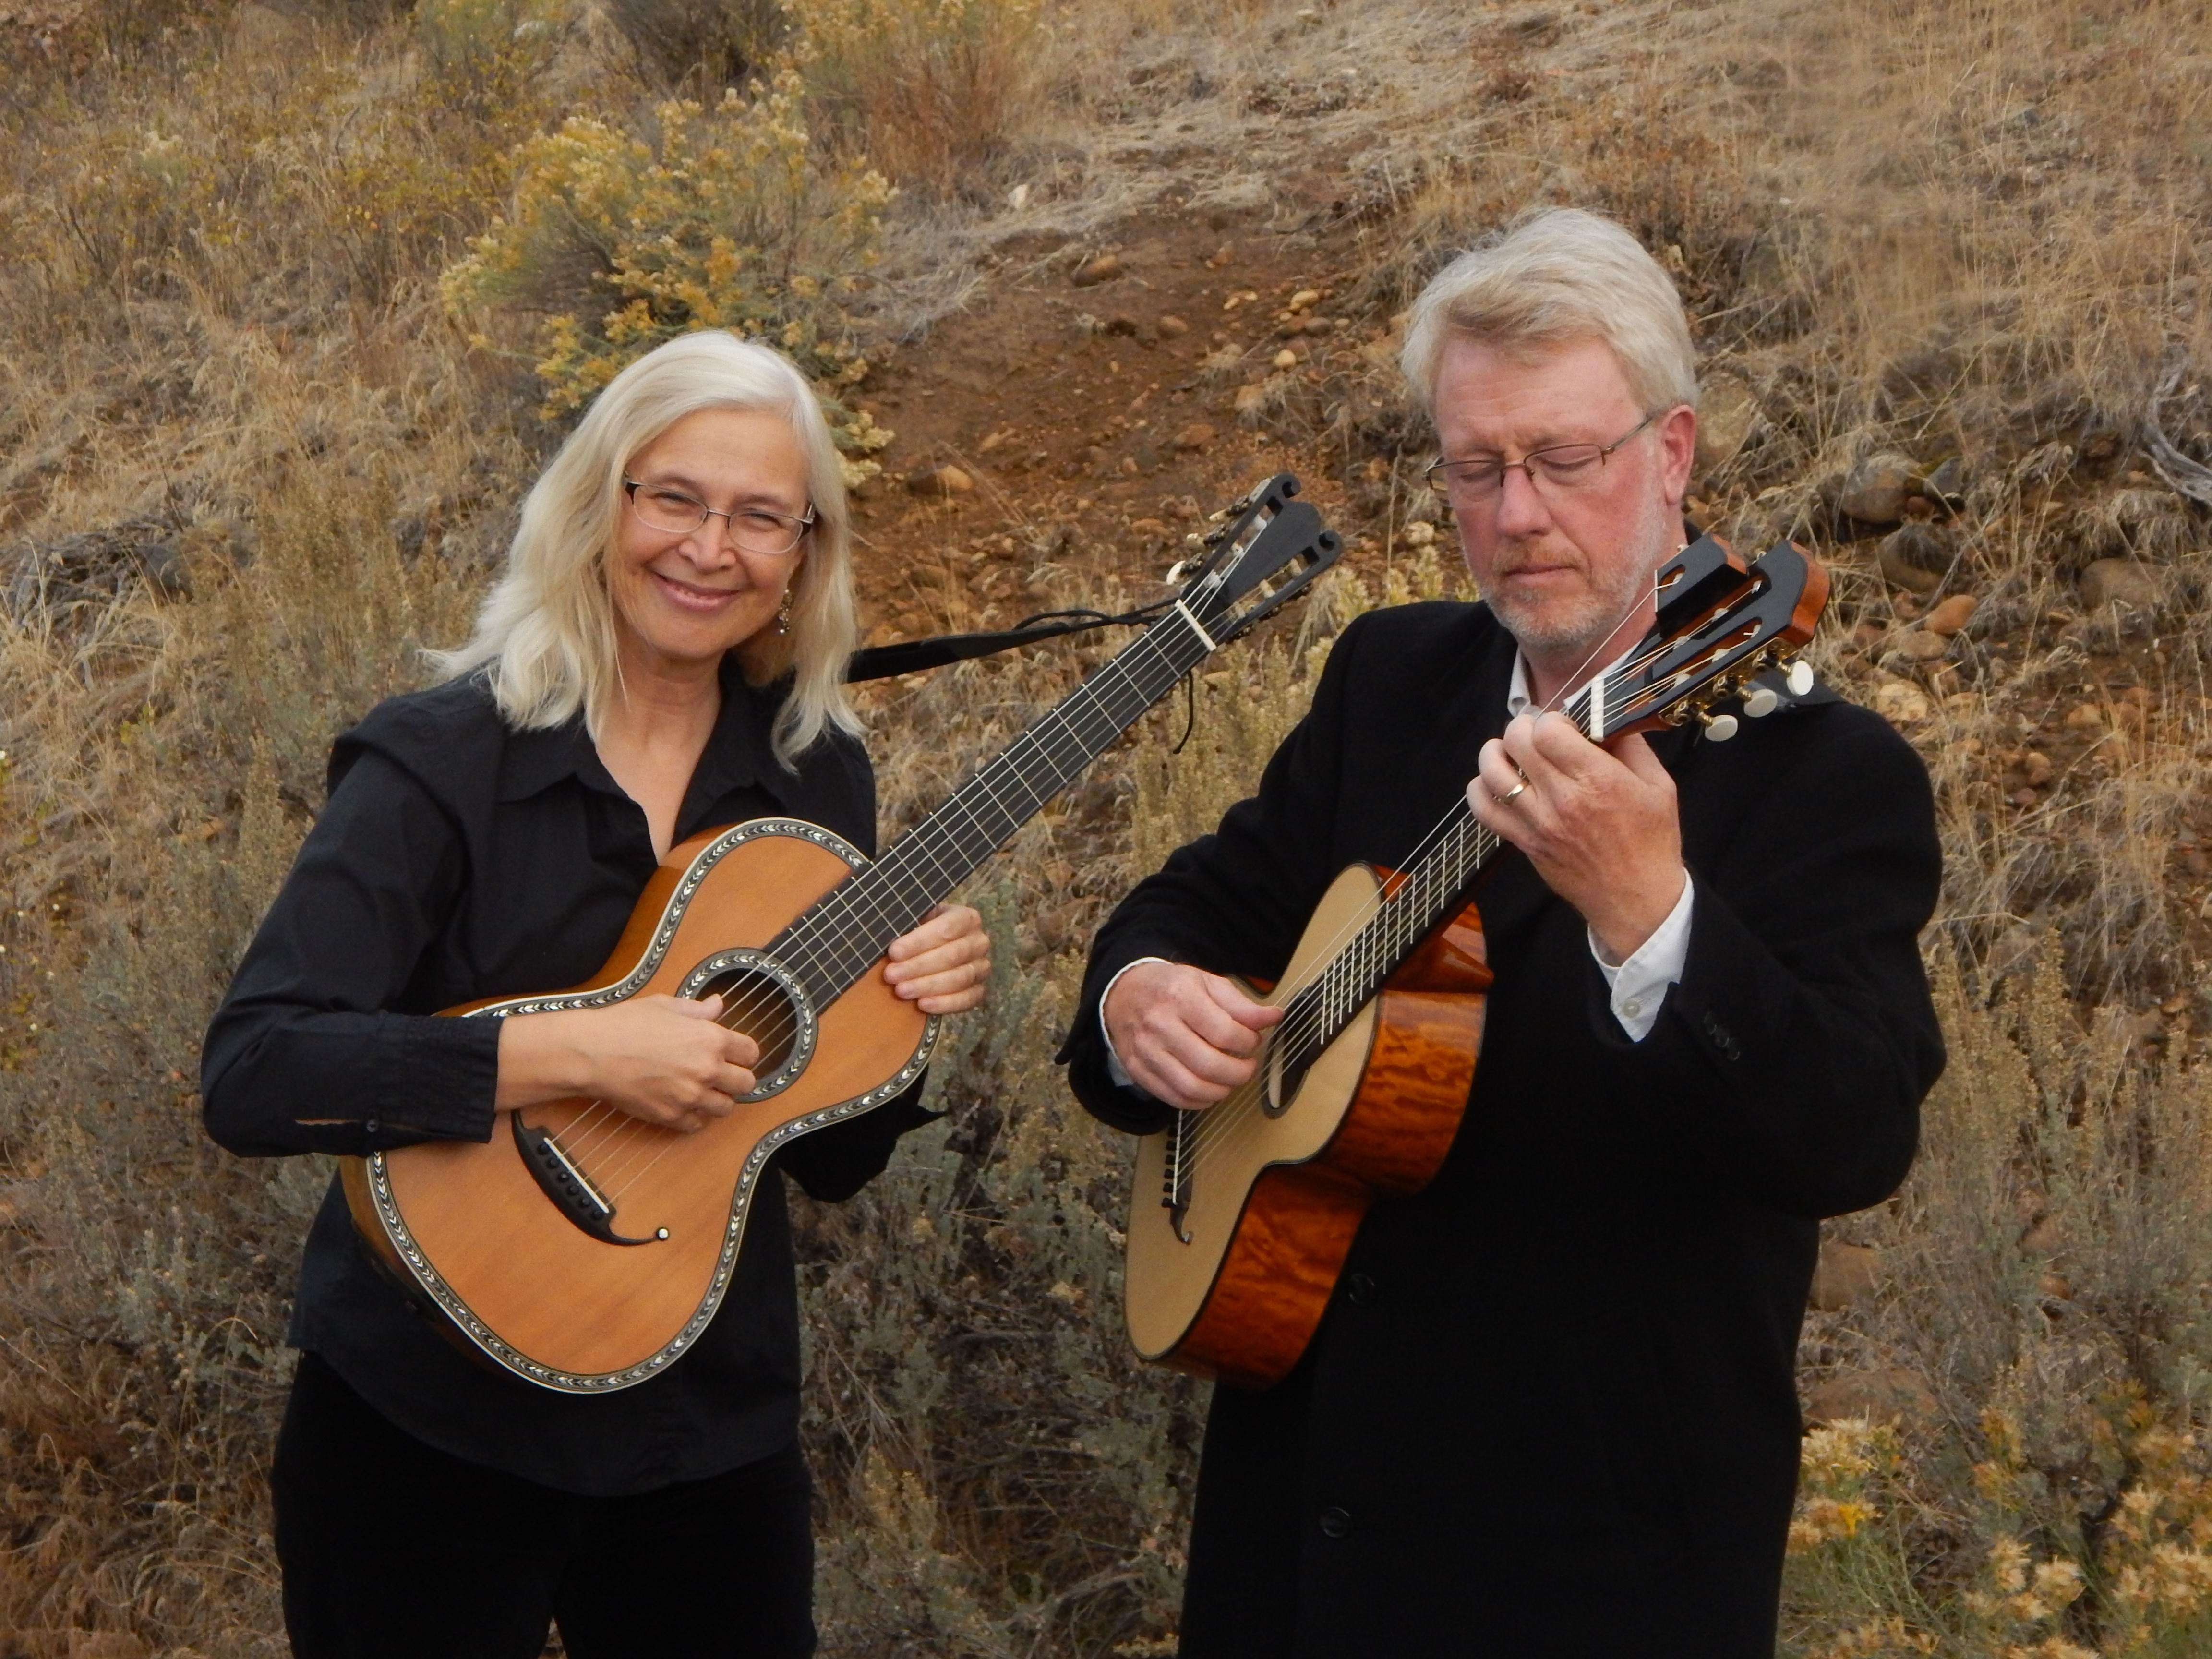 Tamara and Neil Caulkins are partners in music and life. They realized composer Martin Kennedy's composition, meant to honor the geologic majesty of Dry Falls. Photo courtesy of Tamara Caulkins.